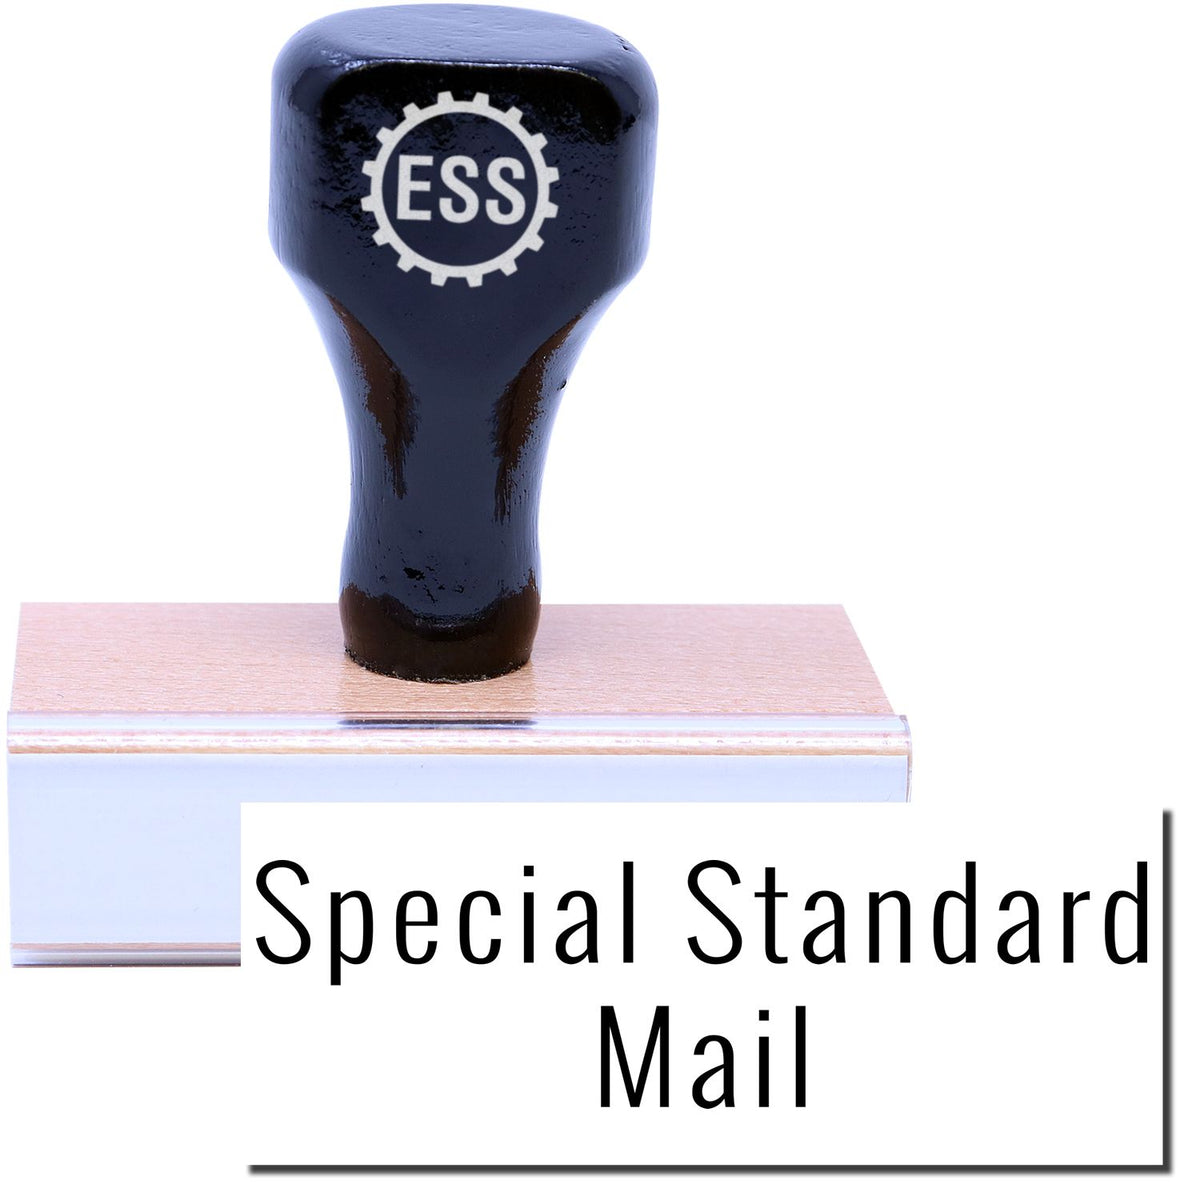 A stock office rubber stamp with a stamped image showing how the text &quot;SPECIAL STANDARD MAIL&quot; in a large font is displayed after stamping.